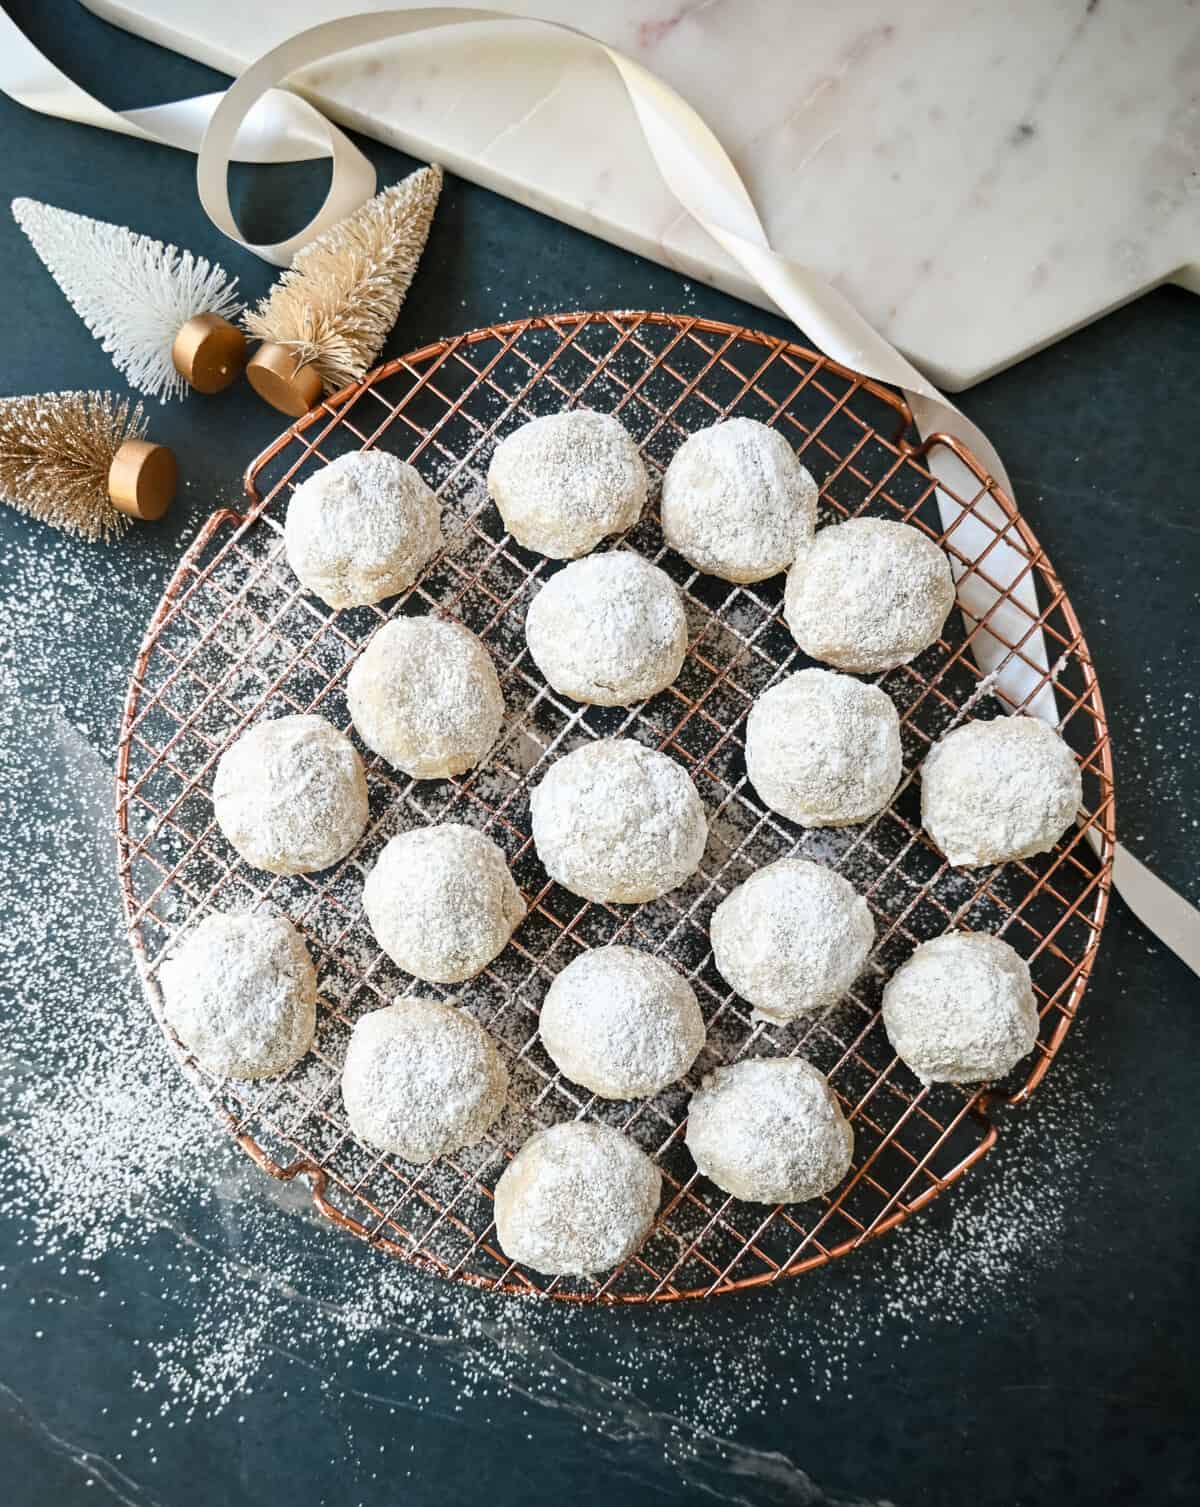 Mexican Wedding Cookies (Snowball Cookies). These buttery, nutty, Mexican wedding cookies are so easy to make and call for only 5 ingredients. These melt-in-your-mouth cookies are perfect to make during the holidays and everyone loves them. The perfect Christmas cookie recipe. 